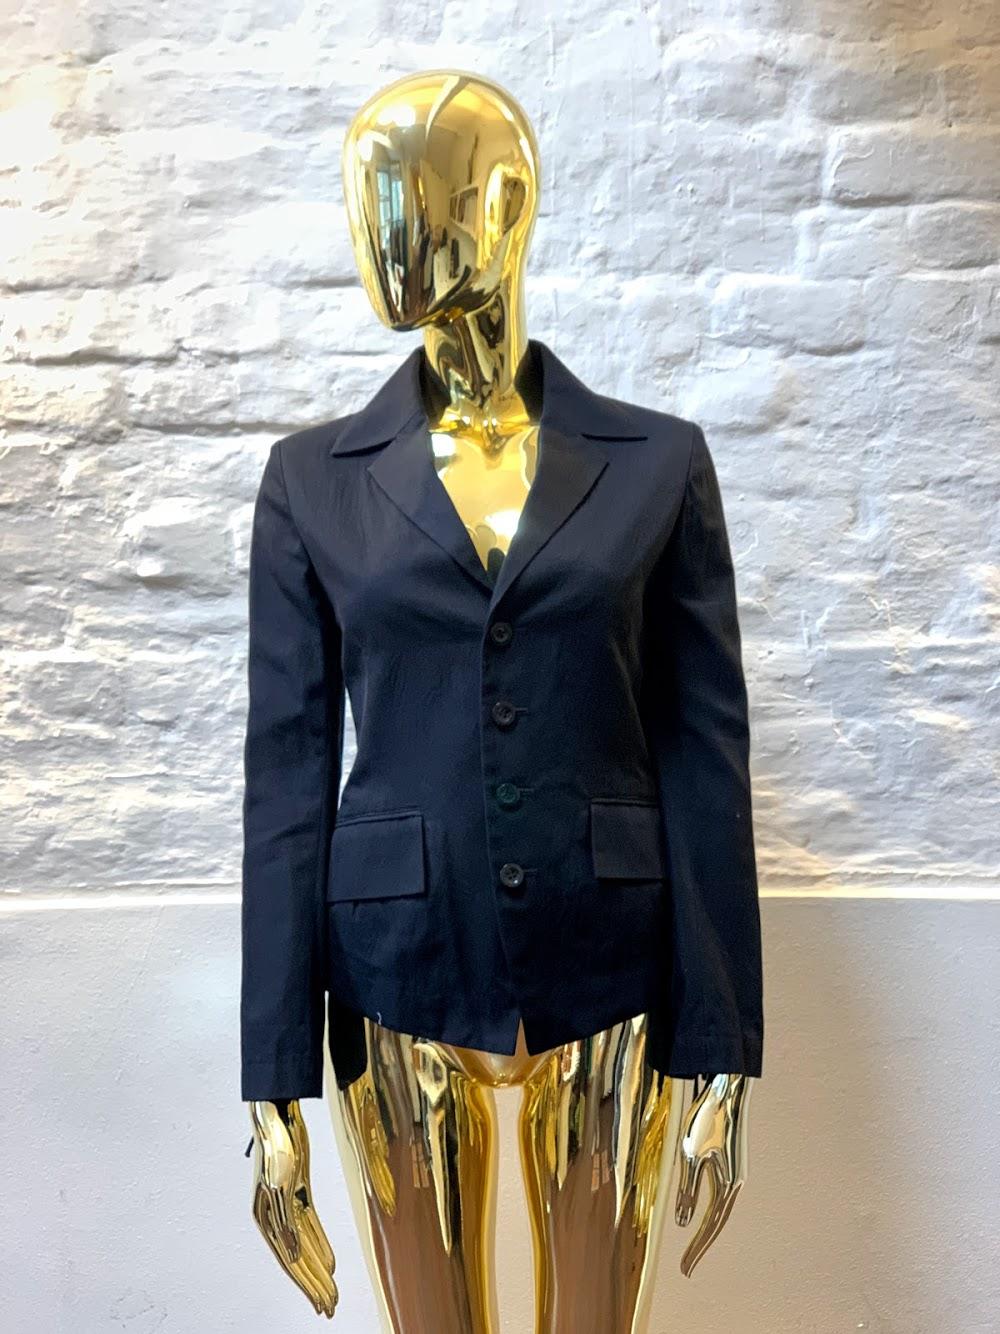 Issey Miyake Corset Leather Tie Jacket made in Japan from cotton and leather. 

Issey Miyake's first collection was launched in New York in 1971, and began to be shown in Paris Fashion Week from Autumn Winter 1973.

From the very beginning to this